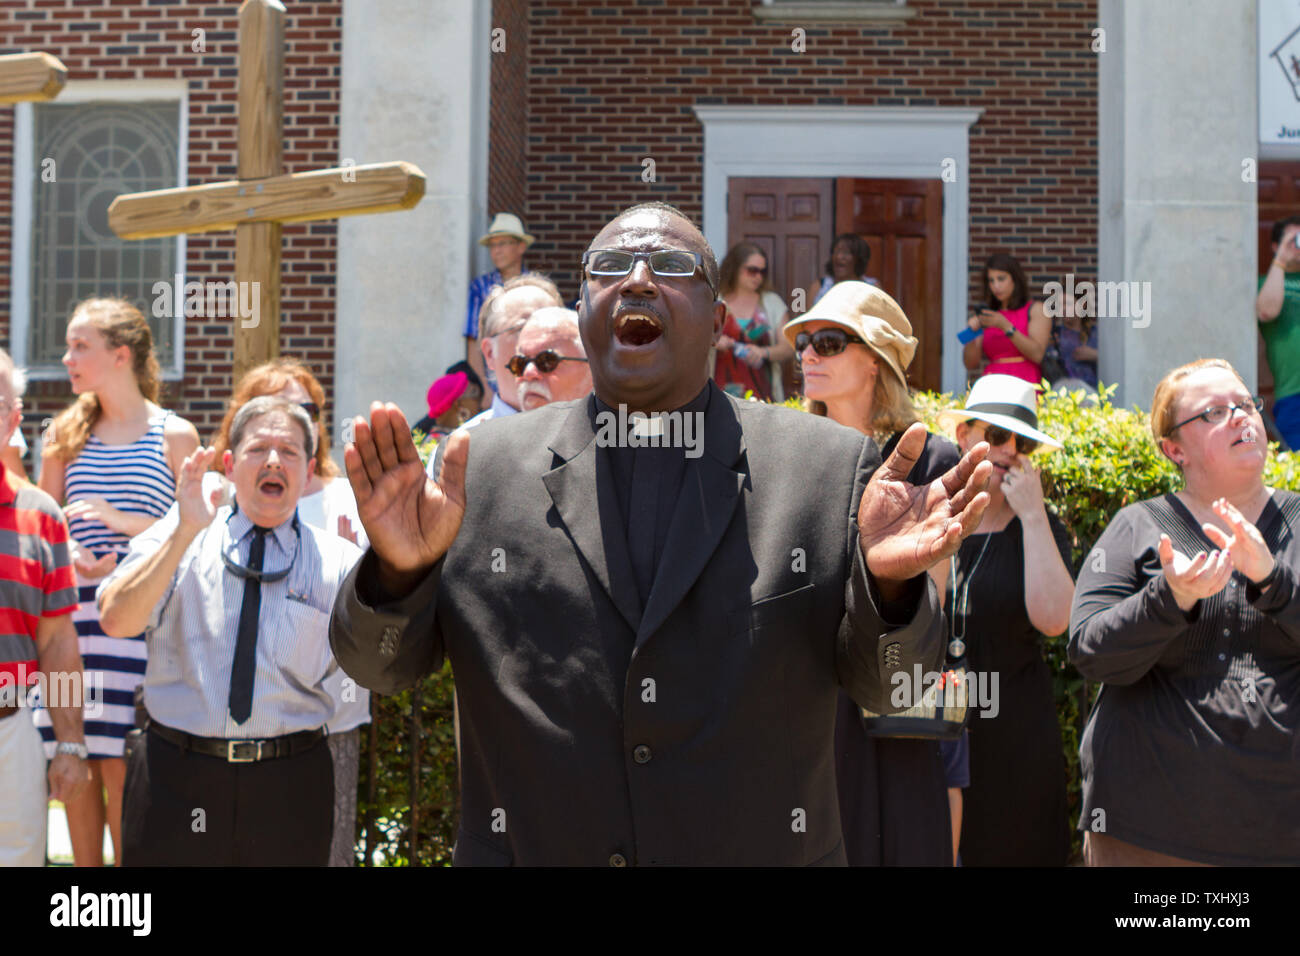 HA local minister leads a crowd in hymns during a prayer vigil outside the Morris Brown AME church in Charleston, South Carolina on June 18, 2015. The vigil attended by hundreds was in honor of the nine people killed by a lone gunman at the Mother Emanuel African Methodist Episcopal Church on June 17, 2015.  The  suspect was captured.  Photo by Gillian Ellis/UPI Stock Photo